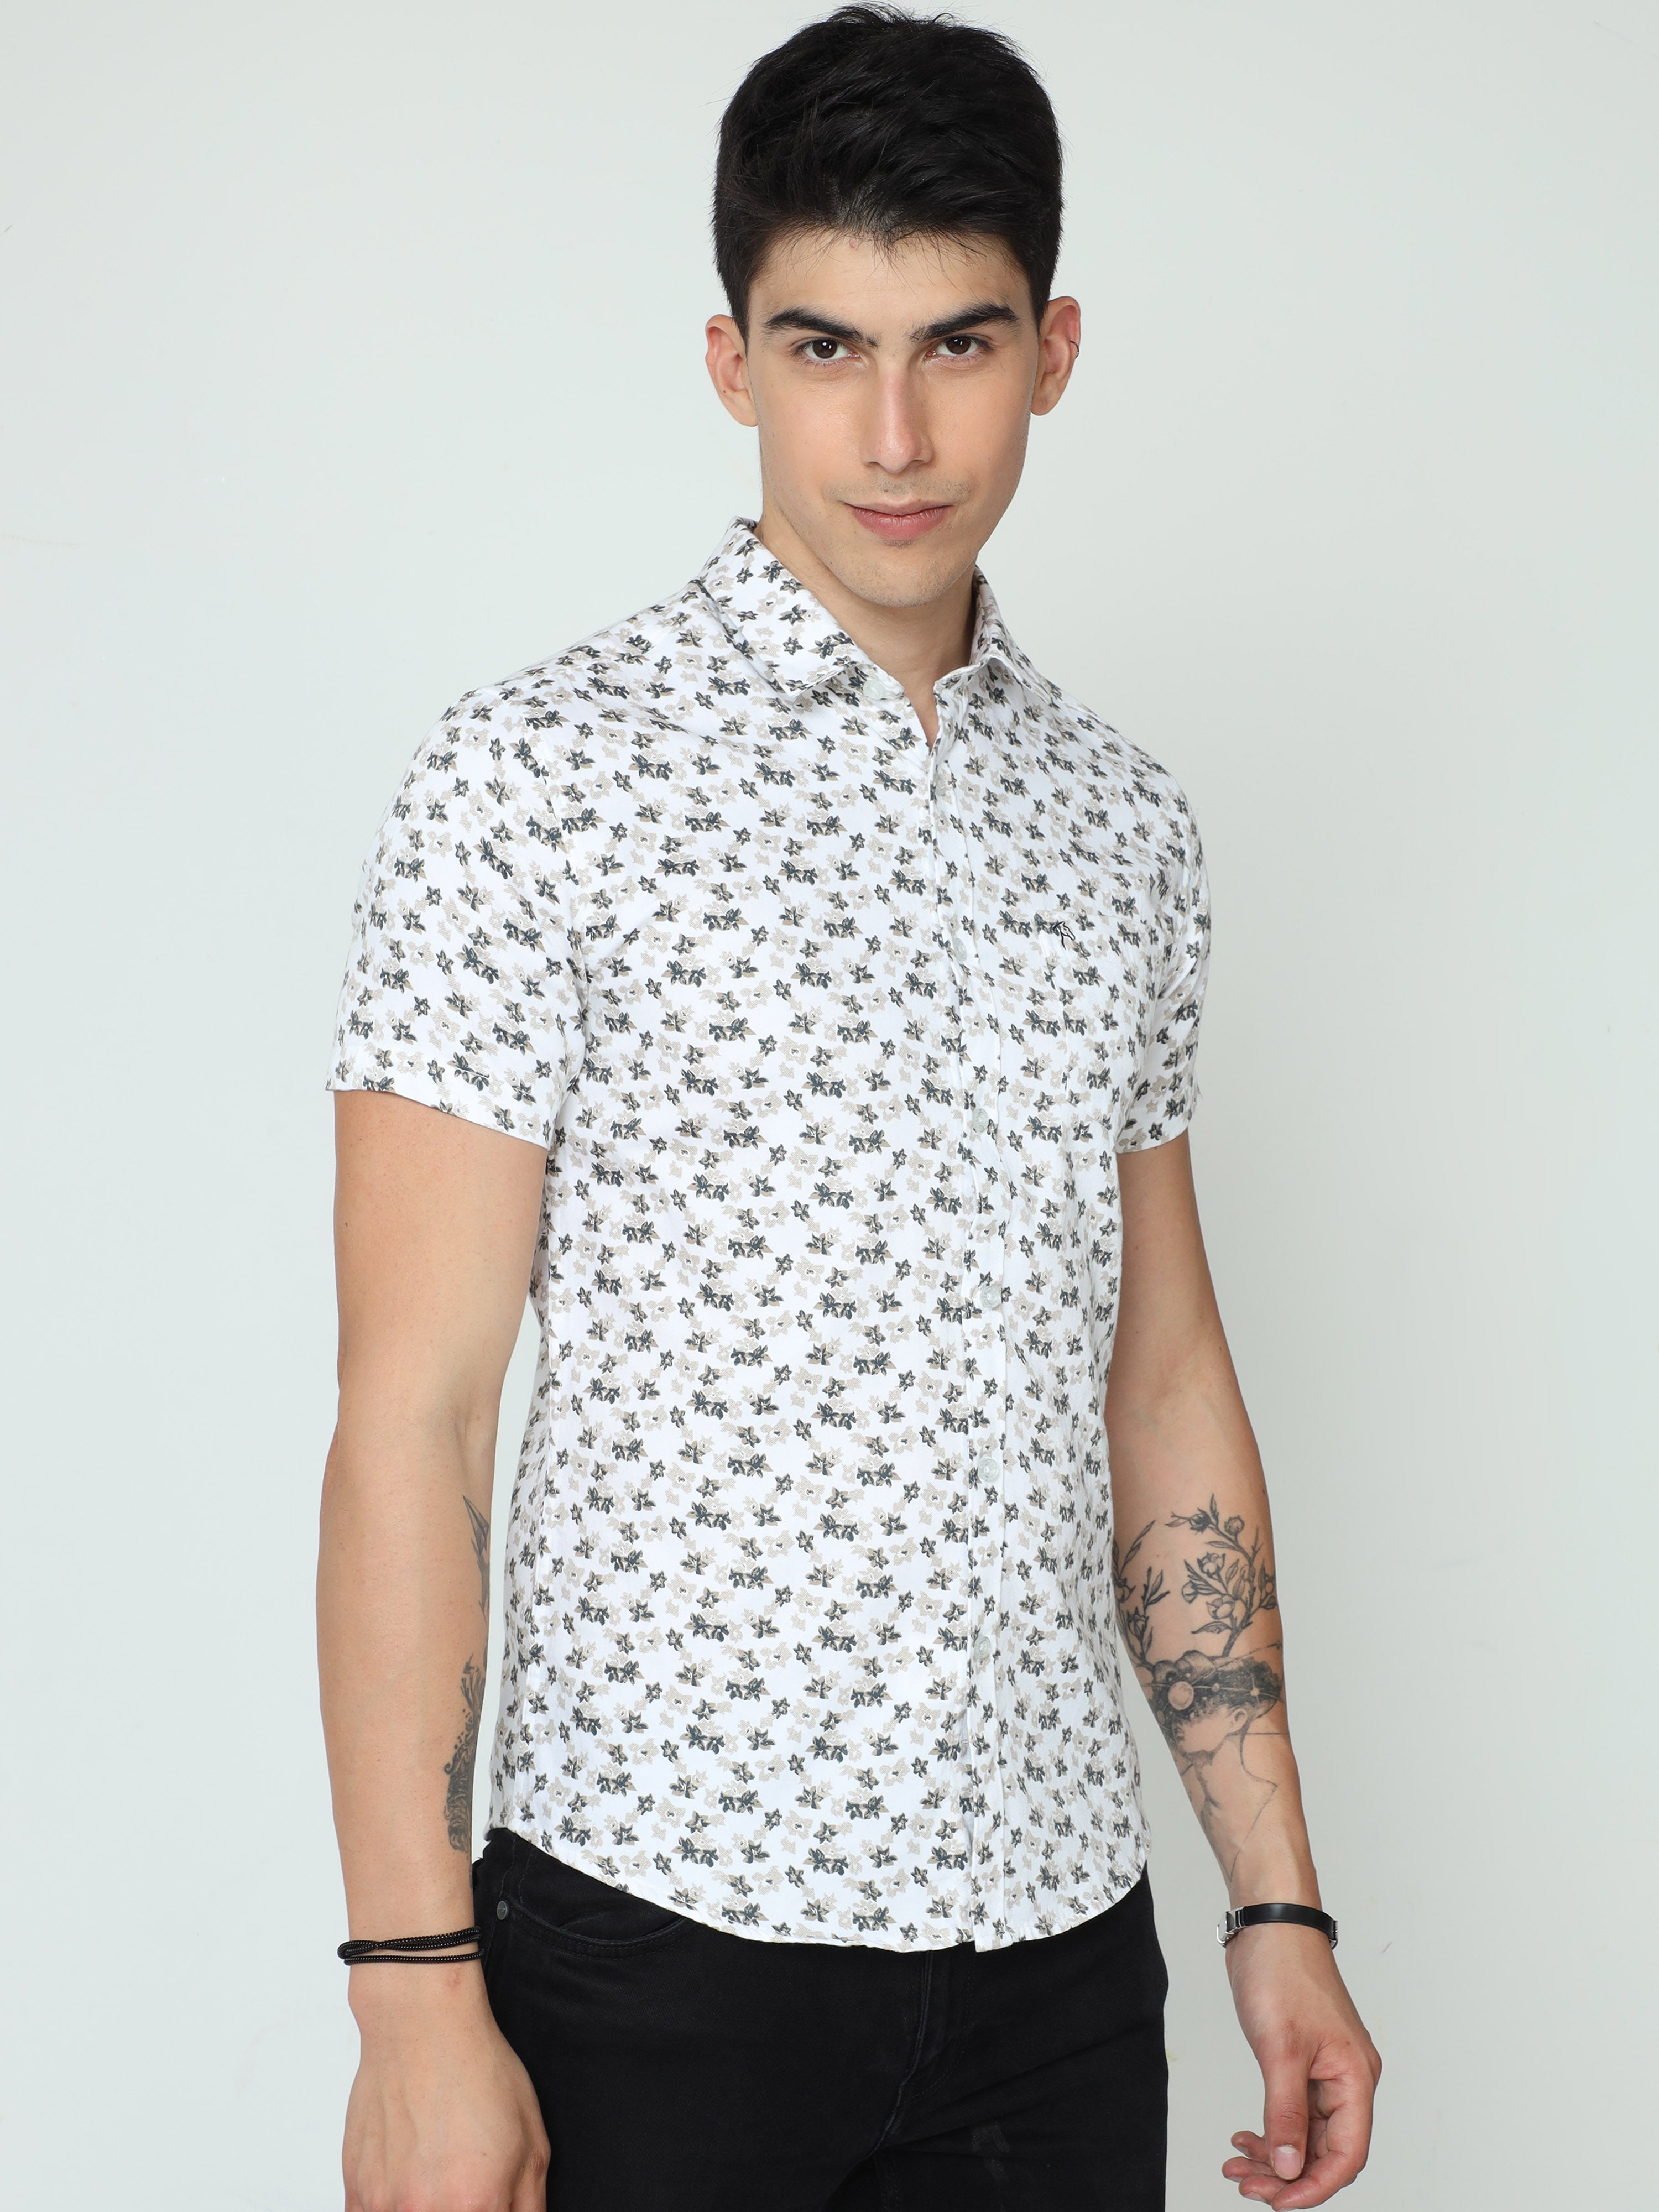 Classic Polo Mens Cotton Half Sleeve Printed Slim Fit Polo Neck White Color Casual Shirt | SBO2-24 A-HS-PRT-BSL